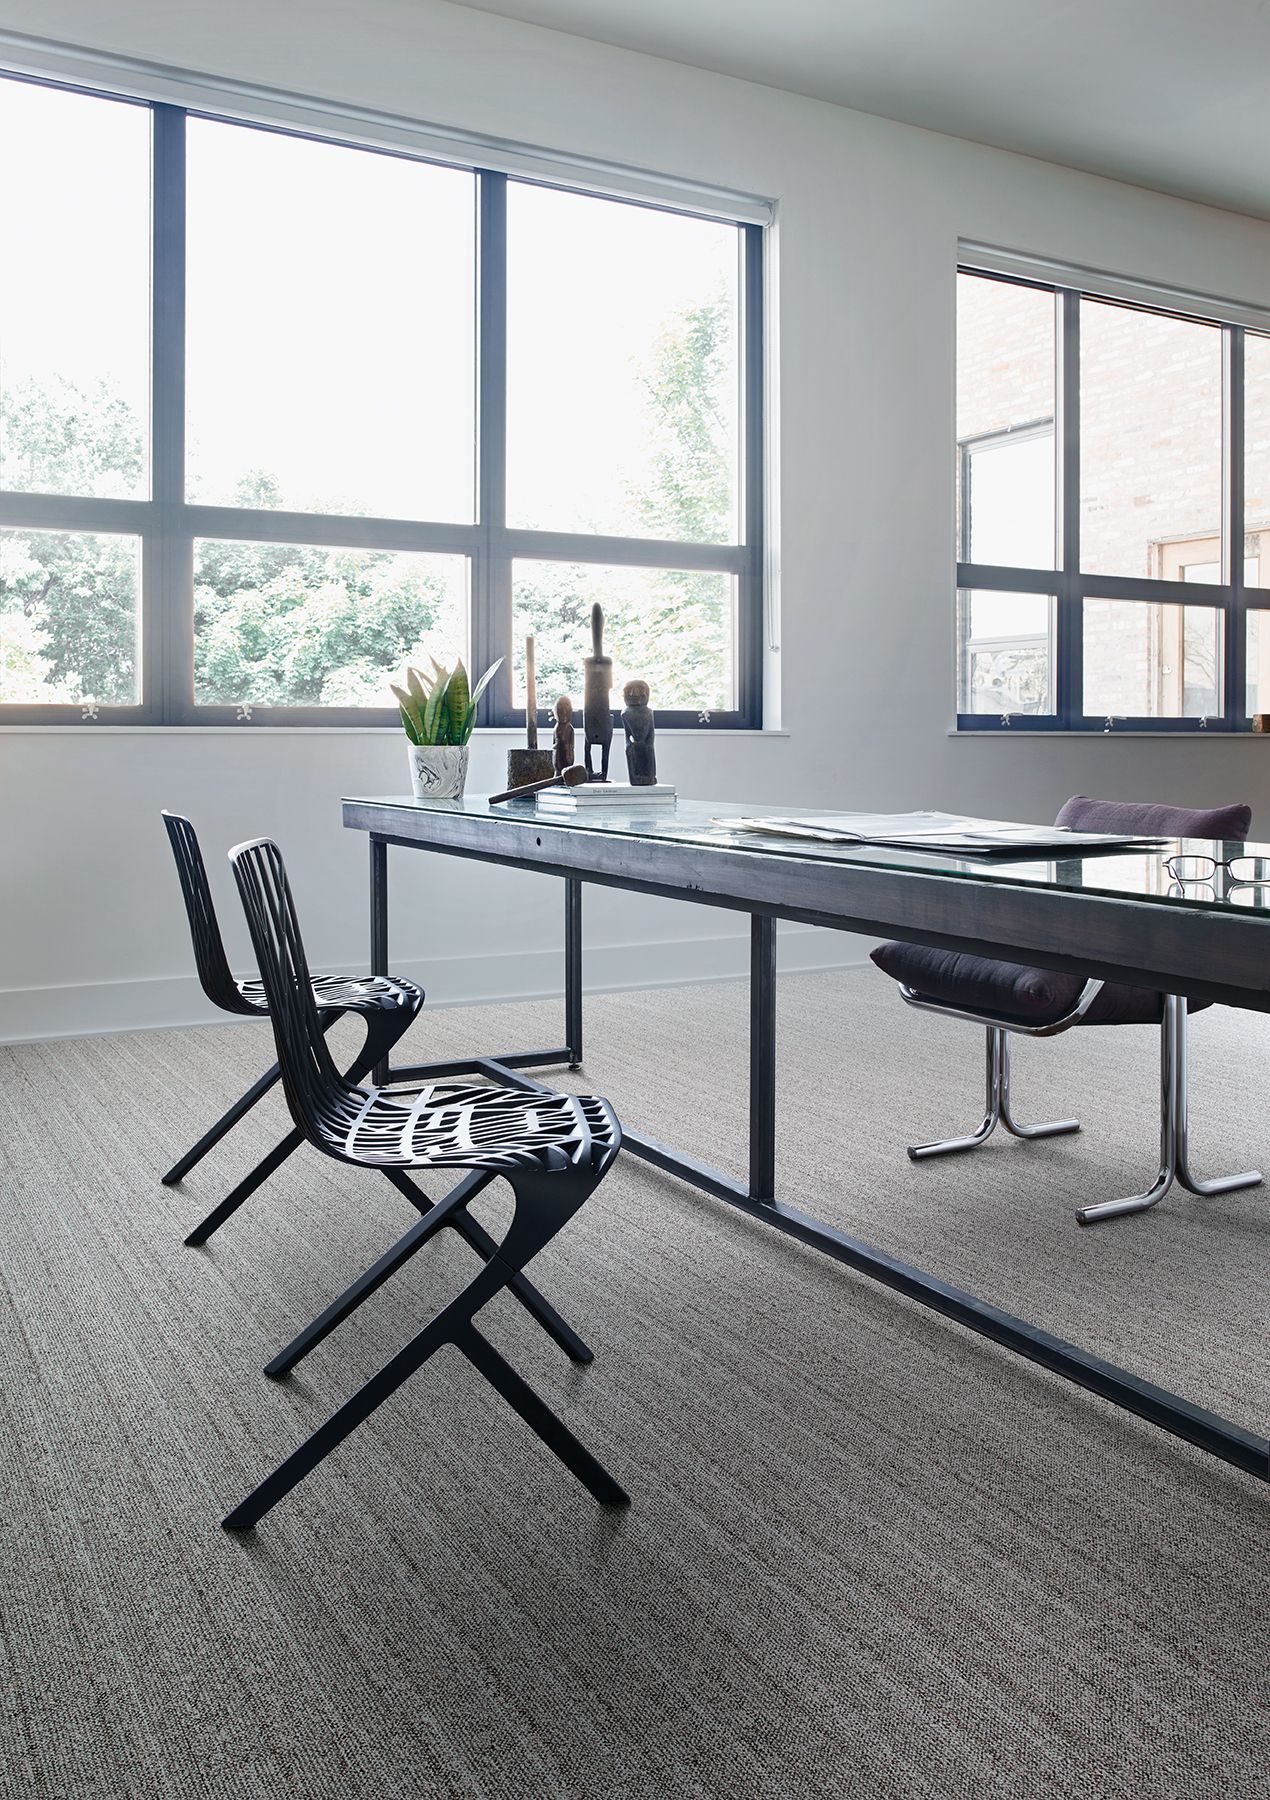 Interface WW860 plank carpet tile in work area with table and chairs Bildnummer 5